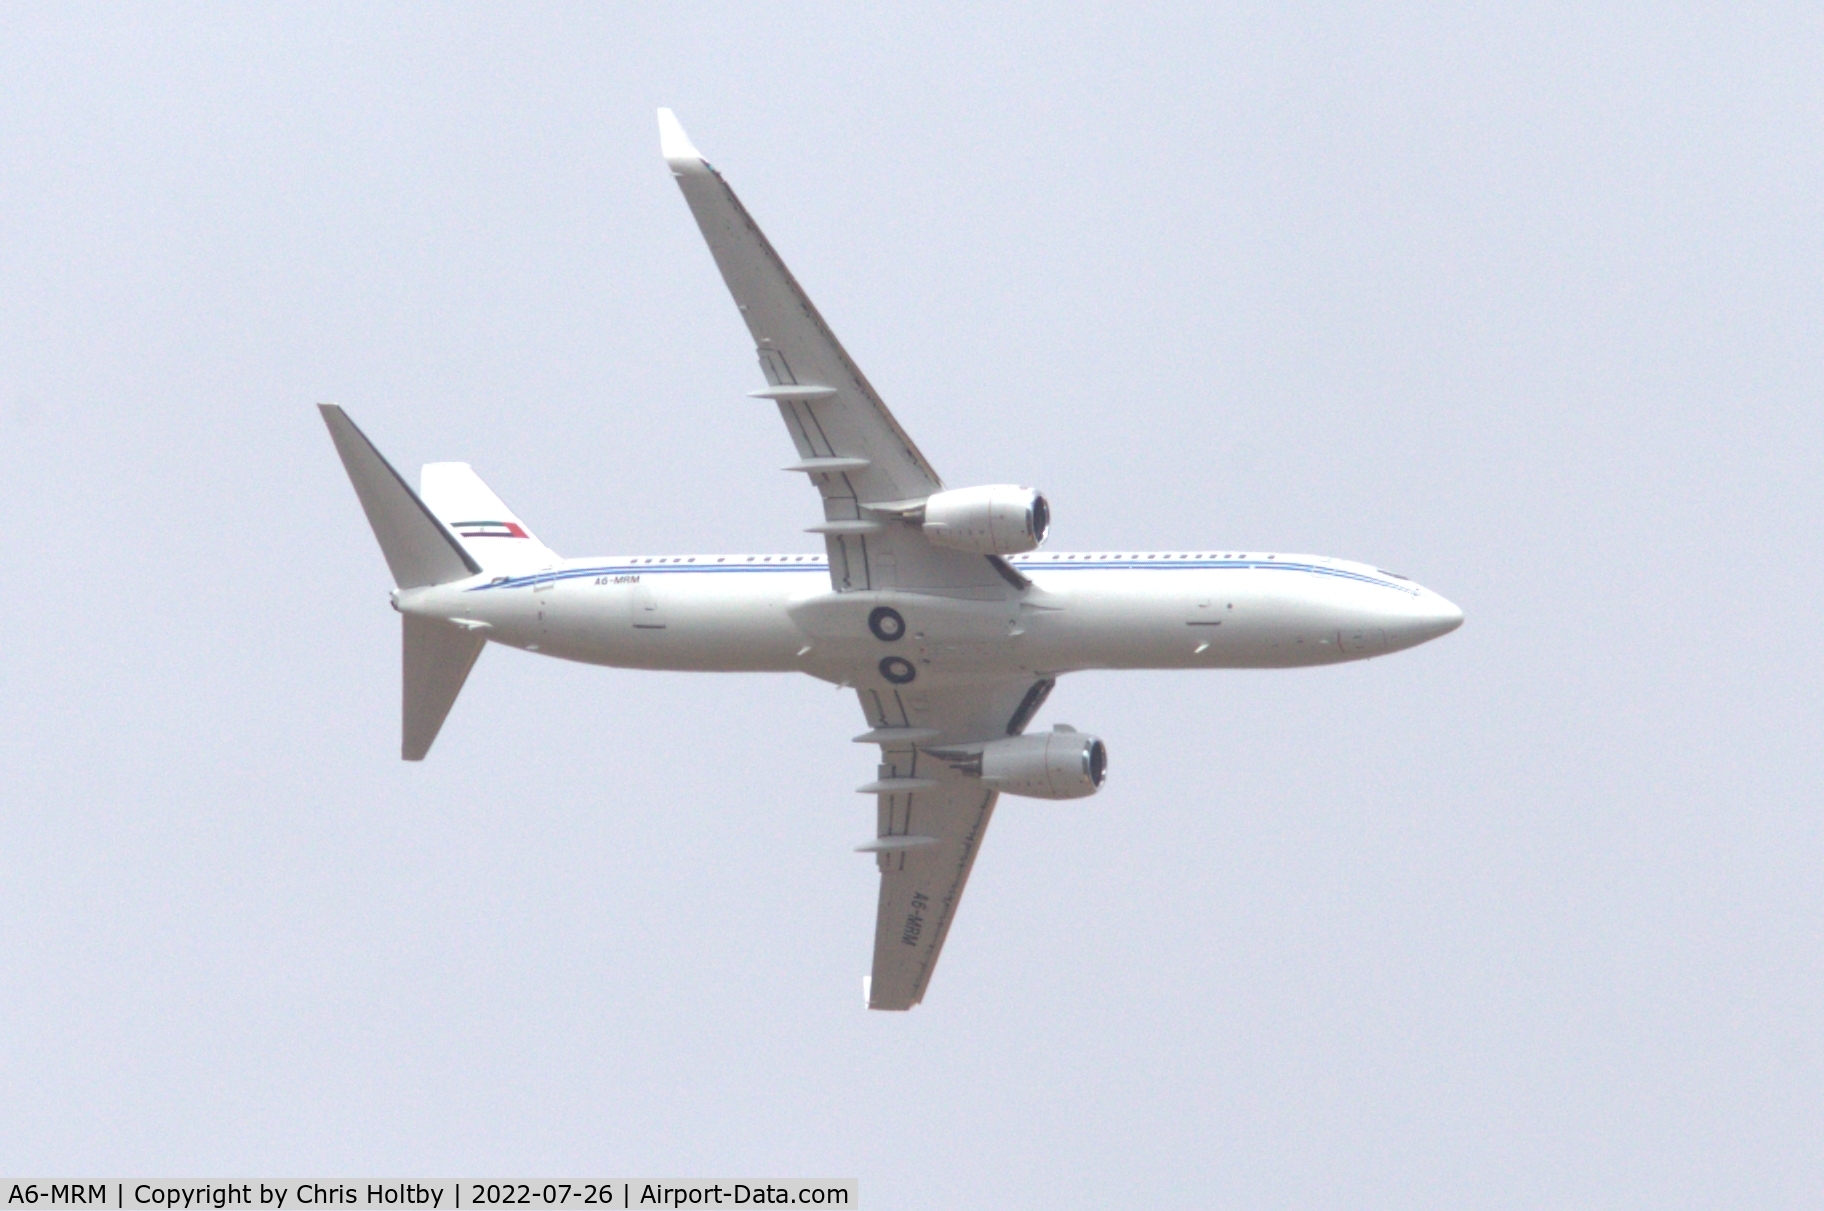 A6-MRM, 2001 Boeing 737-8EC BBJ2 C/N 32450, Over Ware, HErts on approach to Stansted Airport, Essex